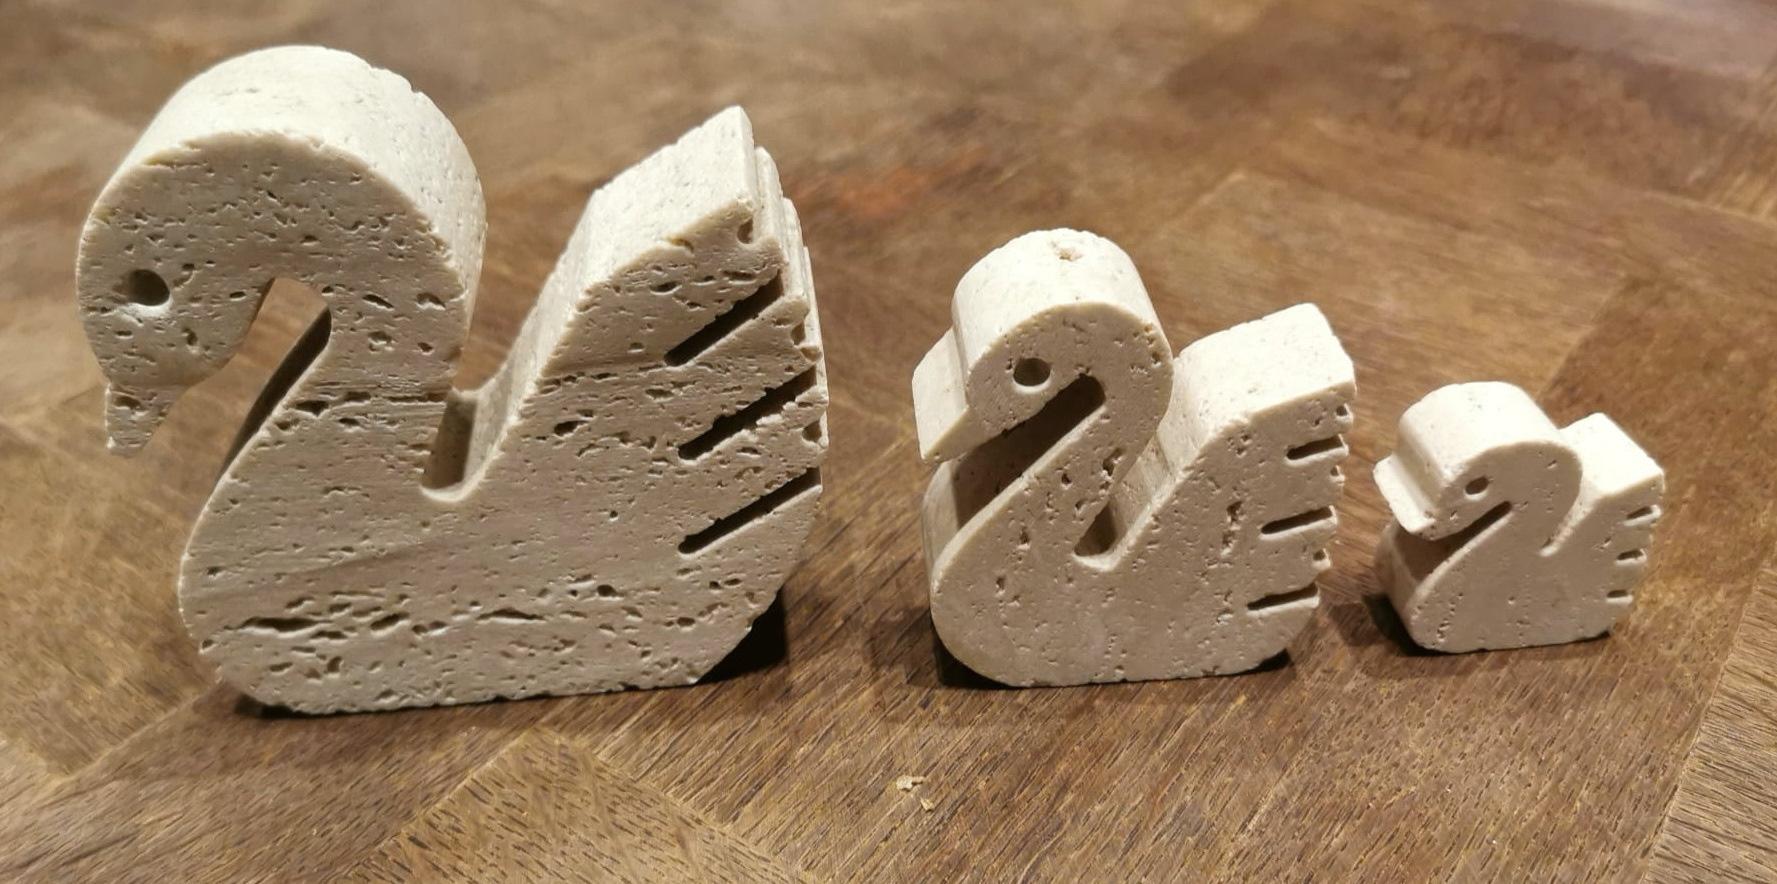 We kindly suggest you read the whole description, because with it we try to give you detailed technical and historical information to guarantee the authenticity of our objects.
A nice and pleasant trio of swans in travertine of three different